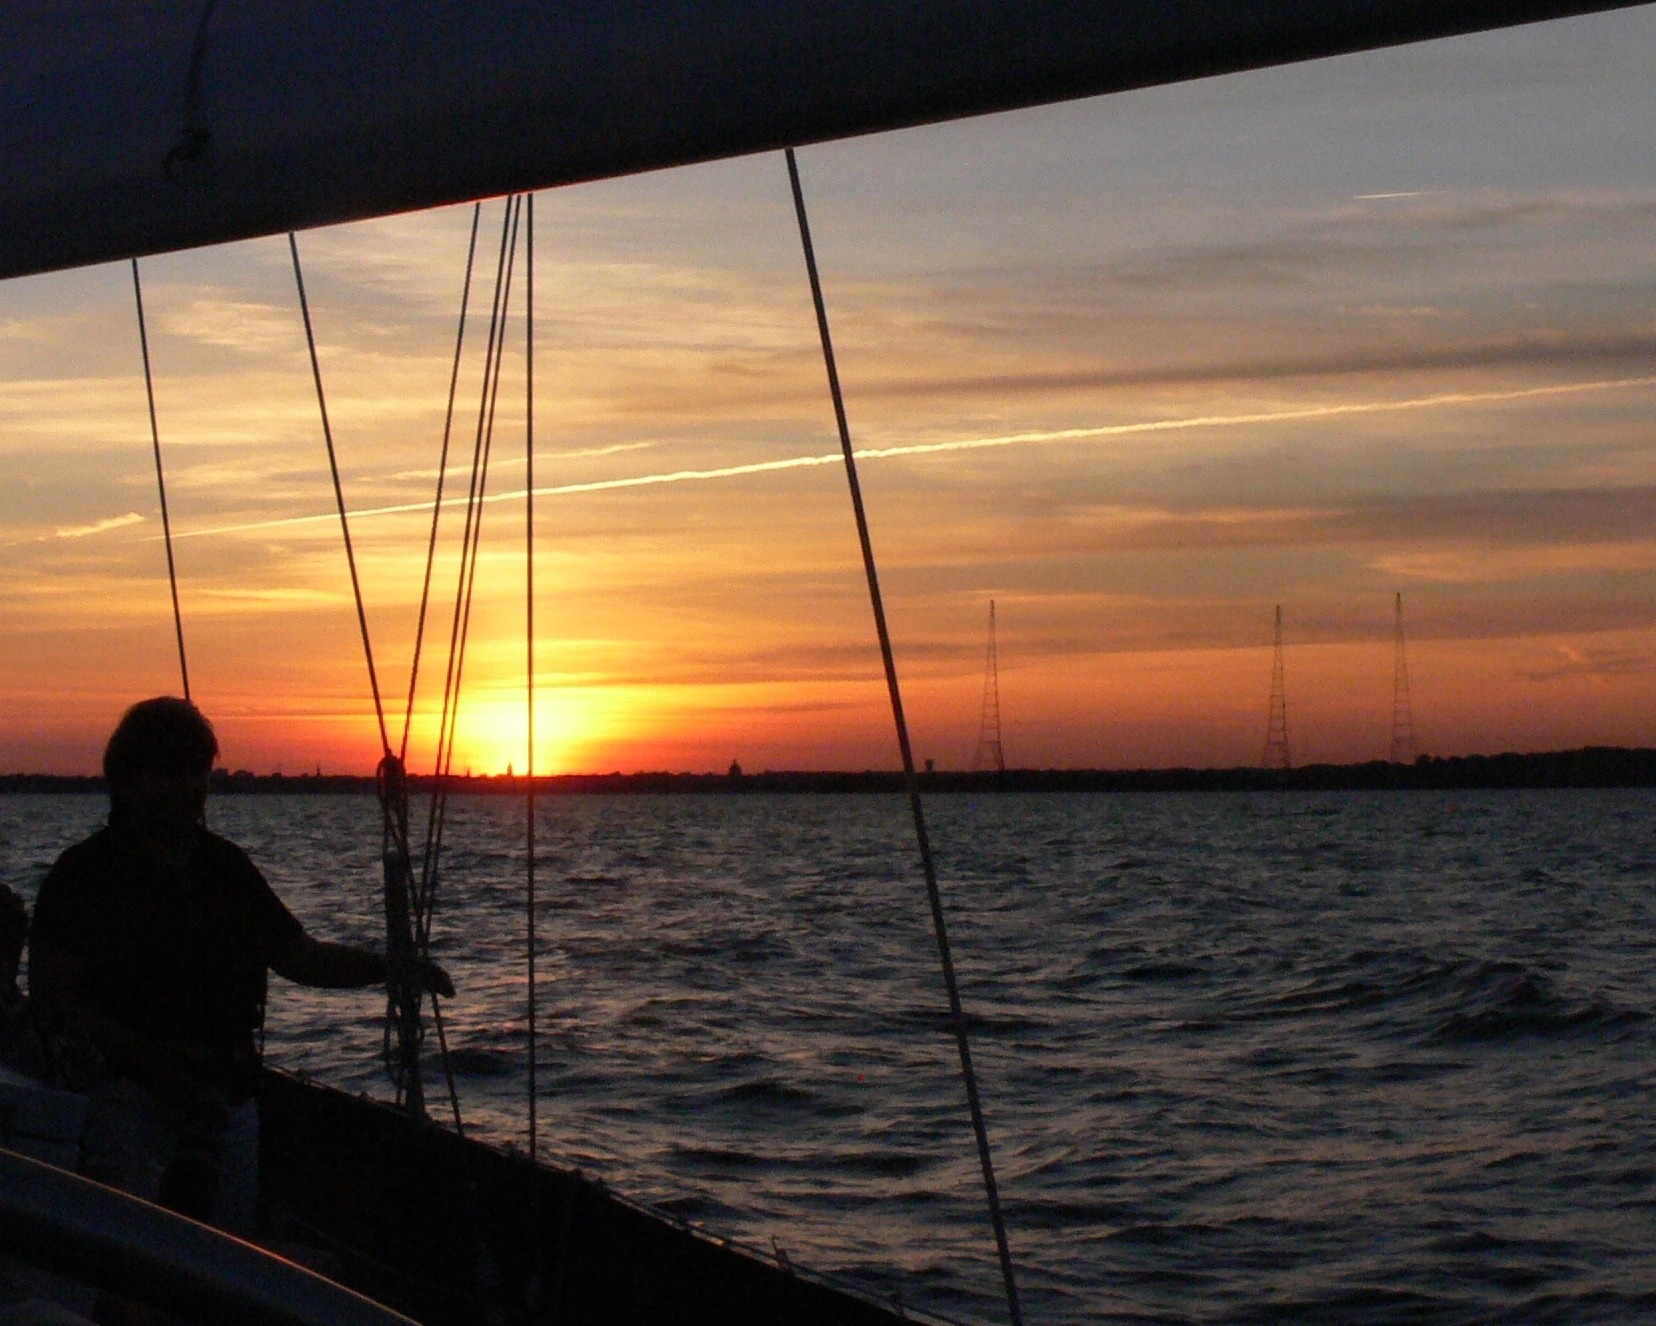 The sun is a fireball as it sinks into the Chesapeake